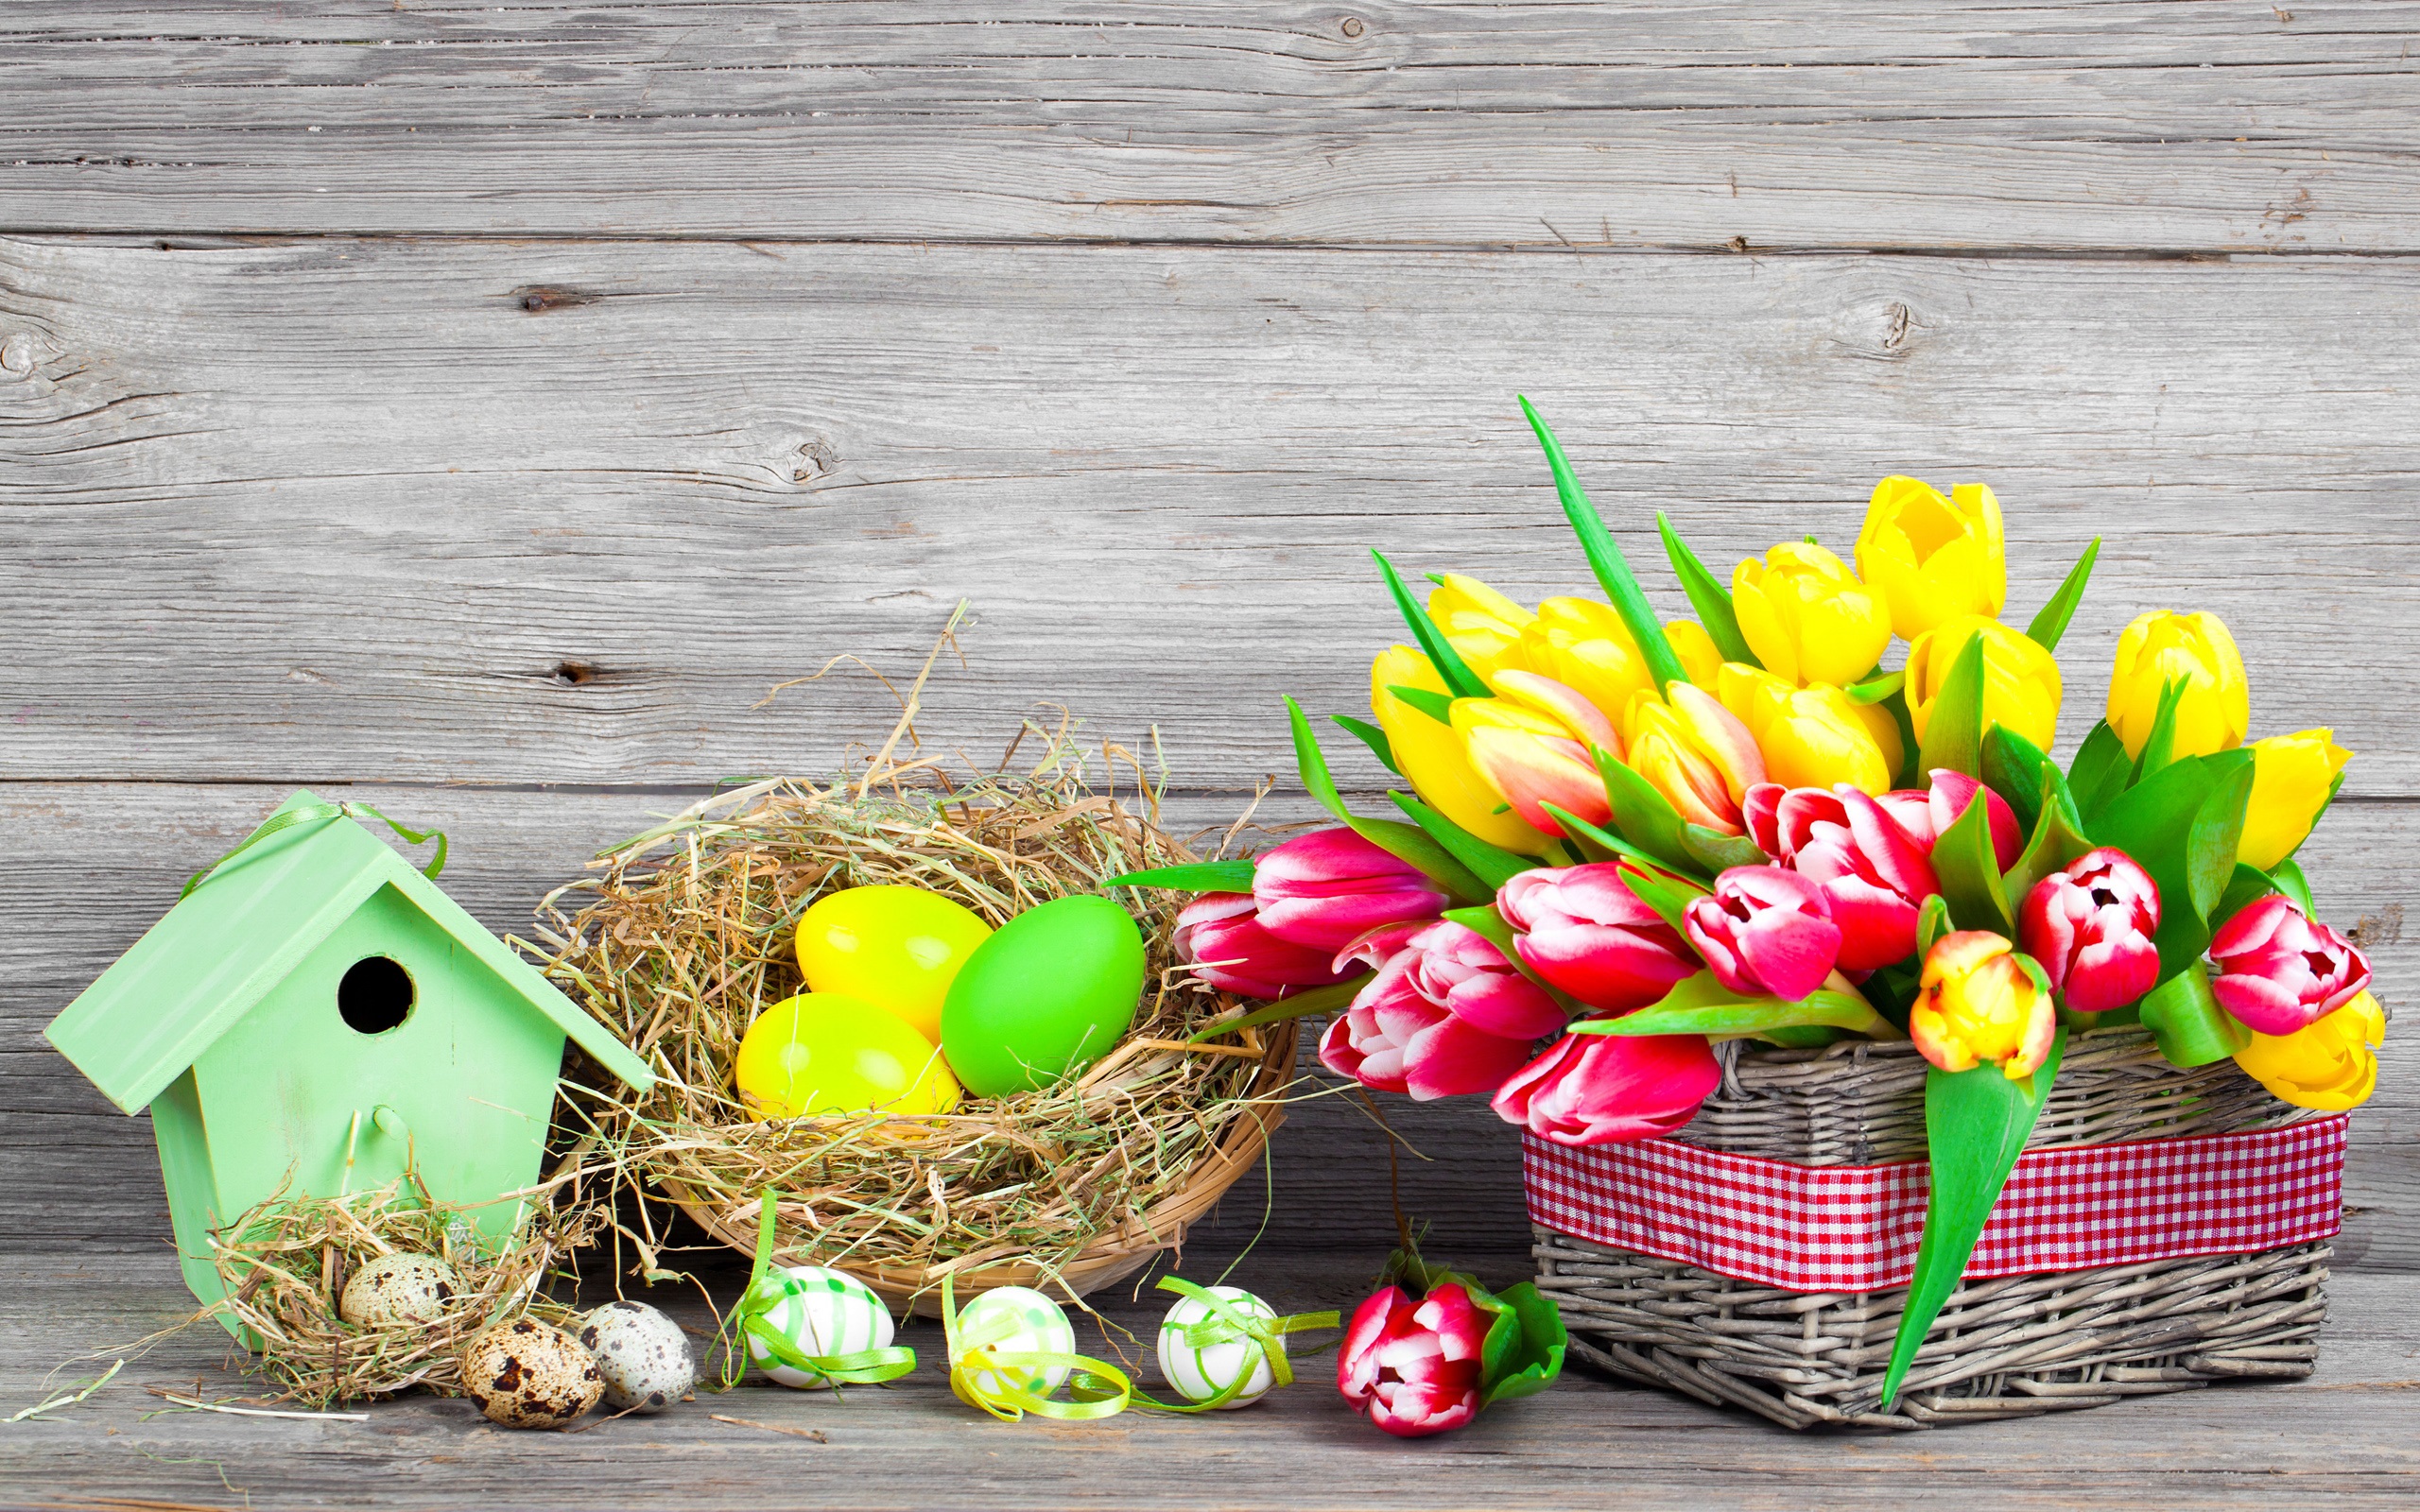 Bird House Colorful Colors Easter Easter Egg Egg Holiday Nest Spring Still Life Tulip 2560x1600